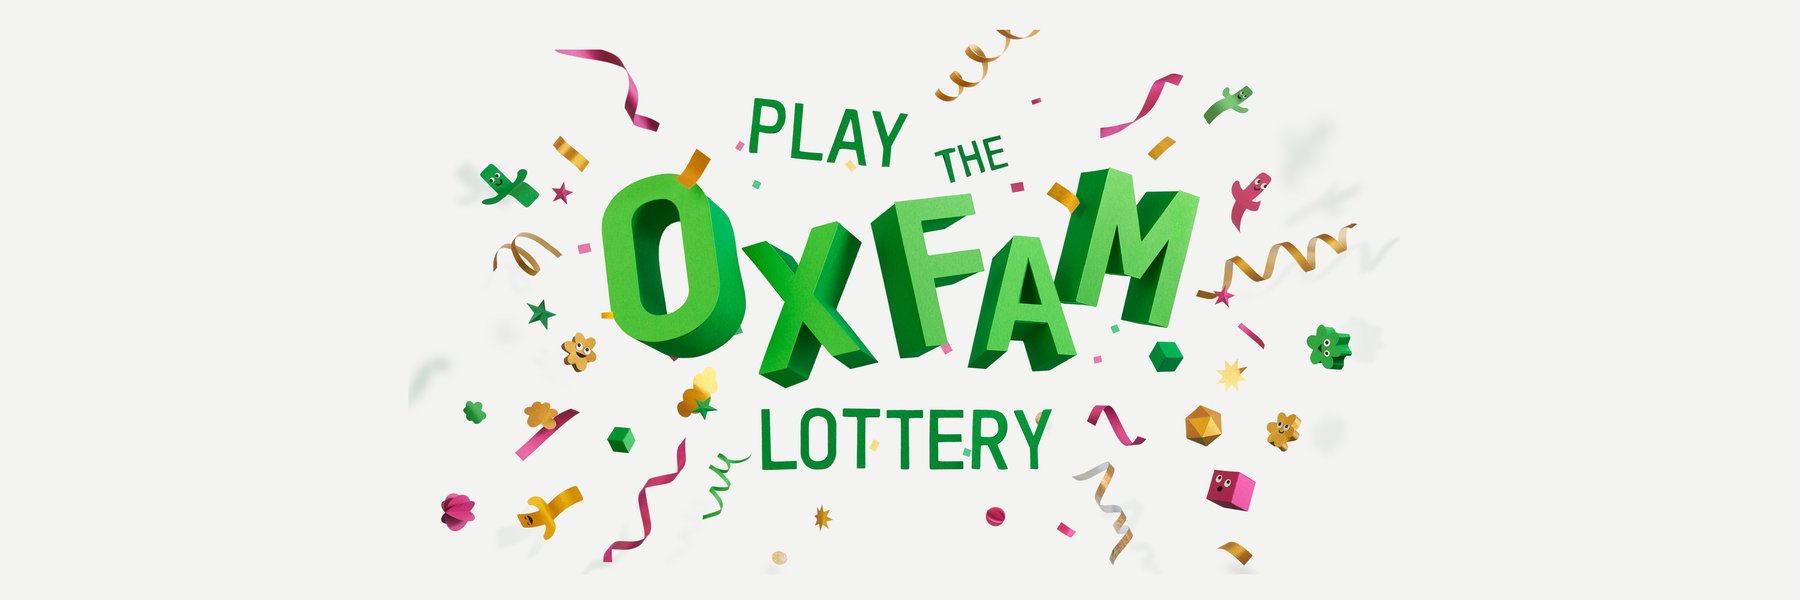 Play the Oxfam lottery